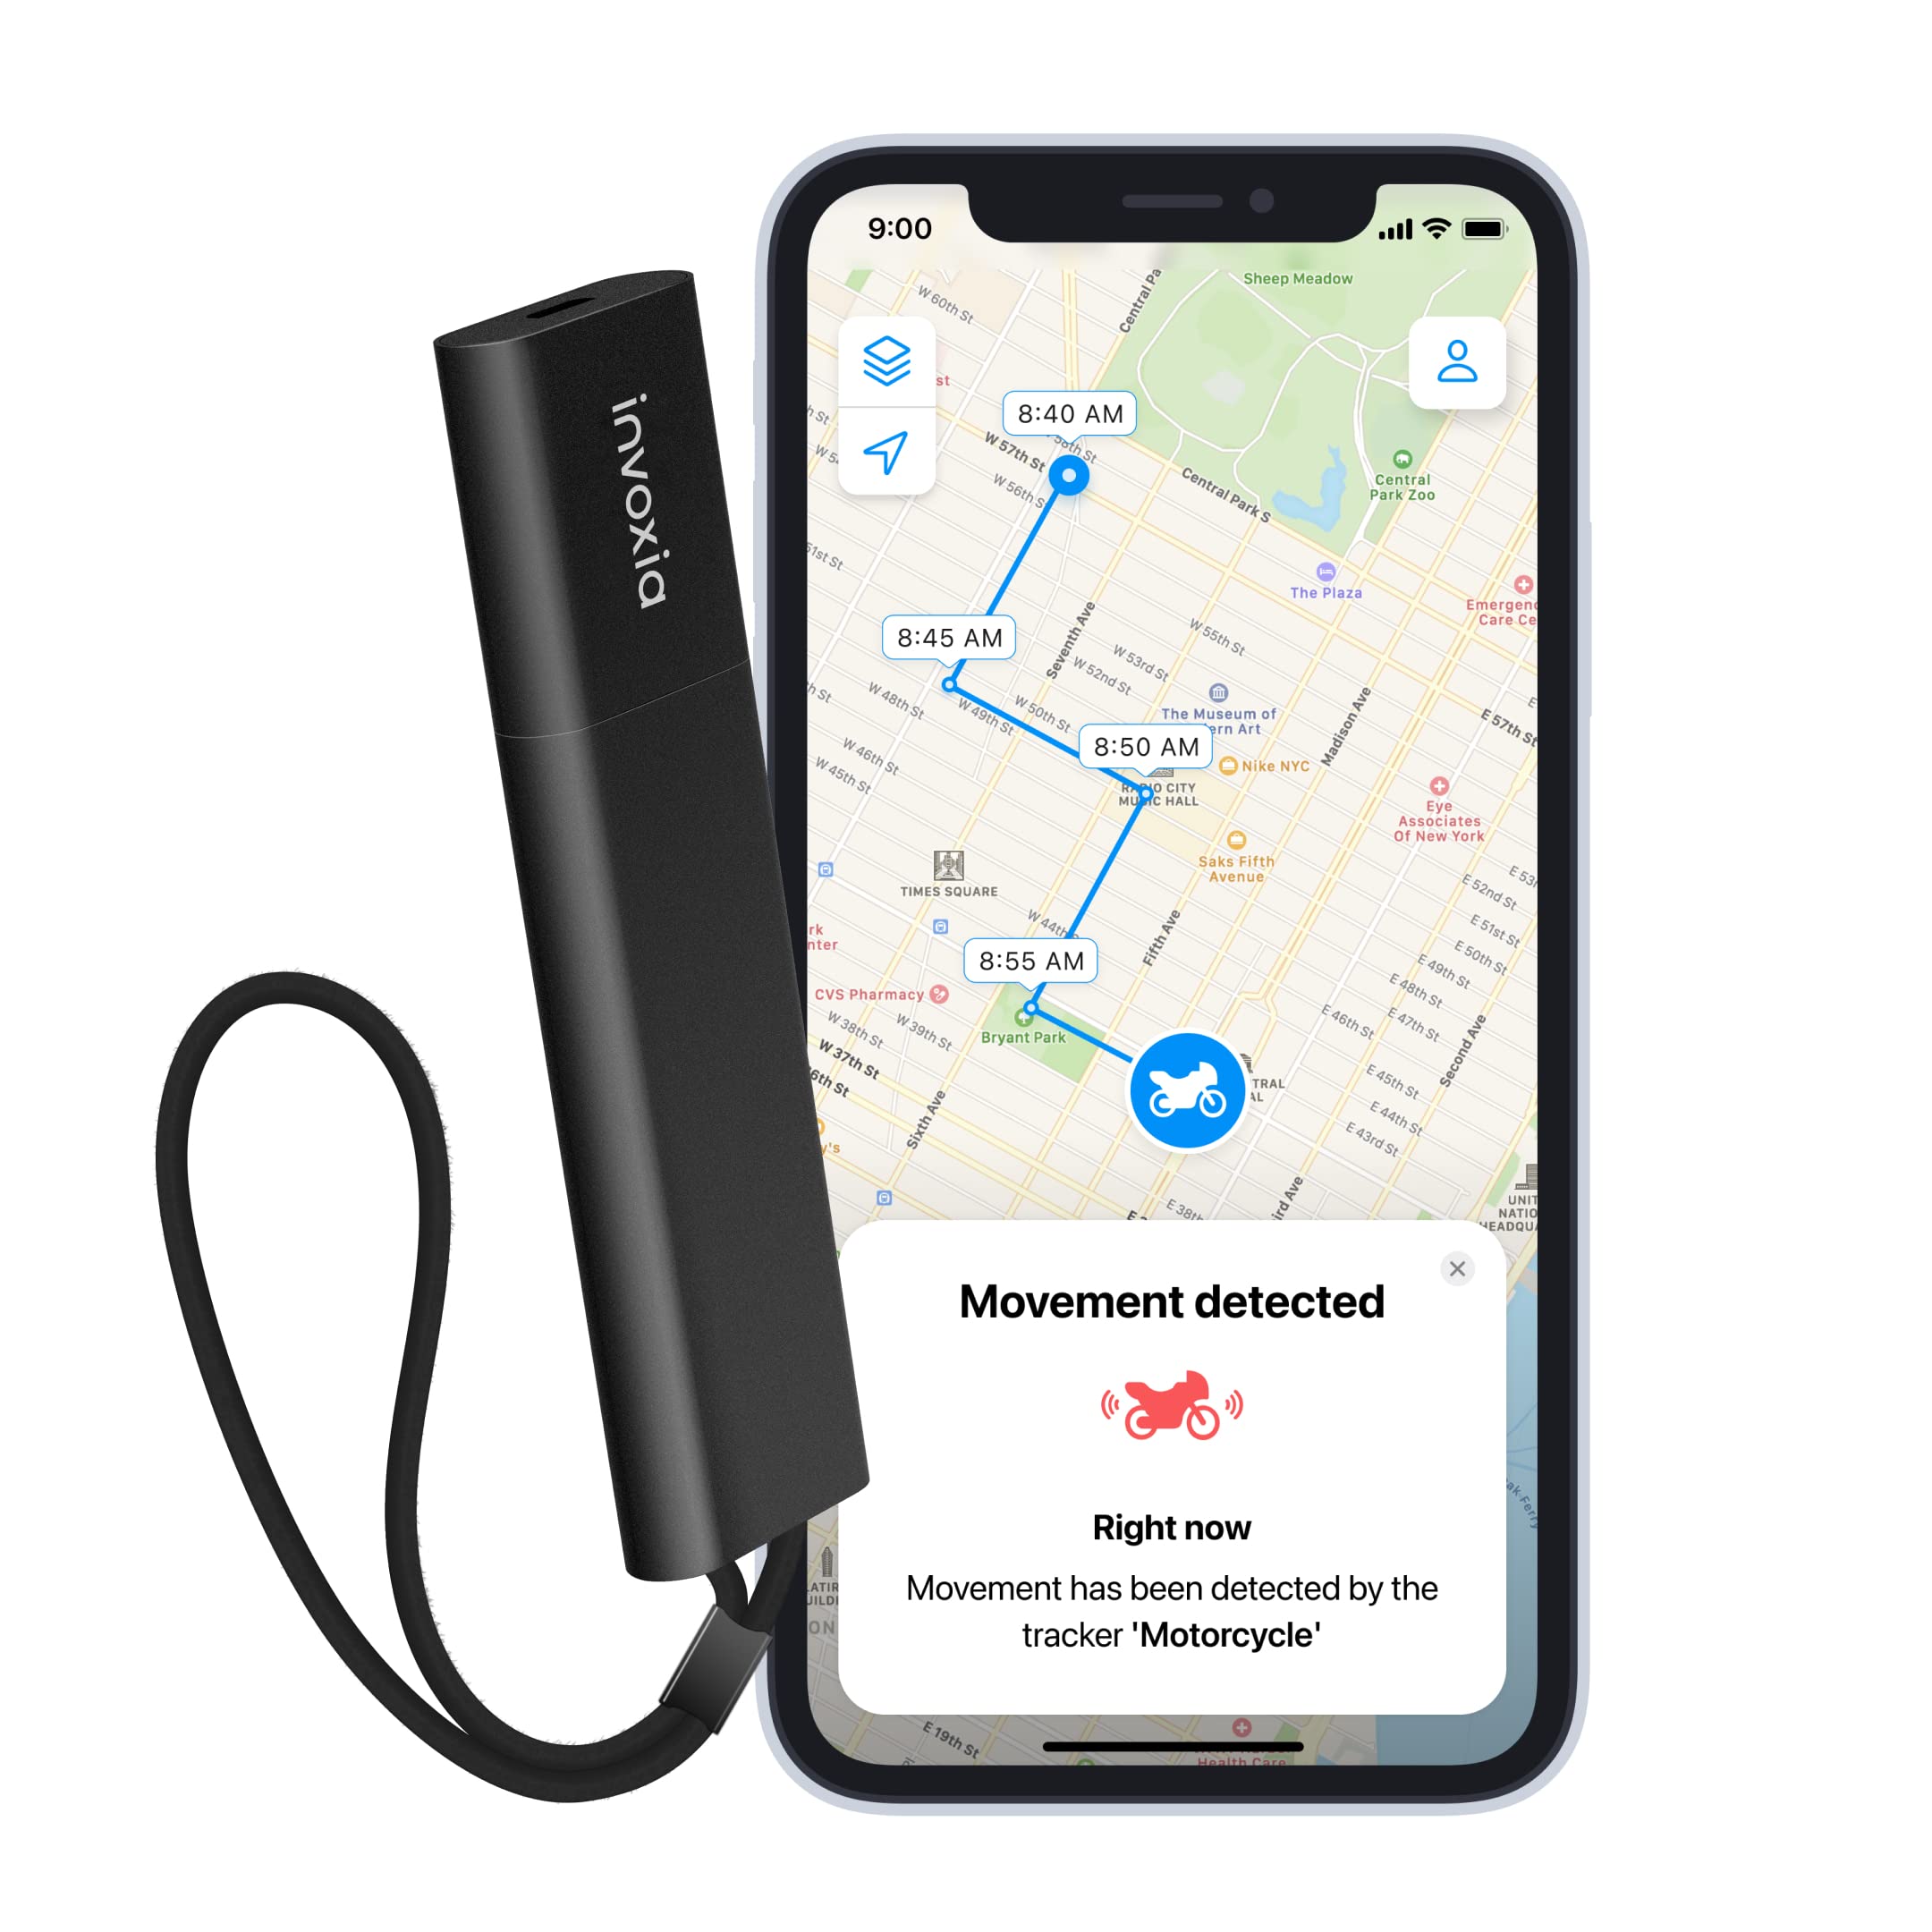 Invoxia Real Time GPS Tracker - for Vehicles, Cars, Motorcycles, Bikes, Kids - Motion and Tilt Alerts - Battery 120 Hours (Moving) to 4 Months (Stationary) - Affordable Subscription Required, Black